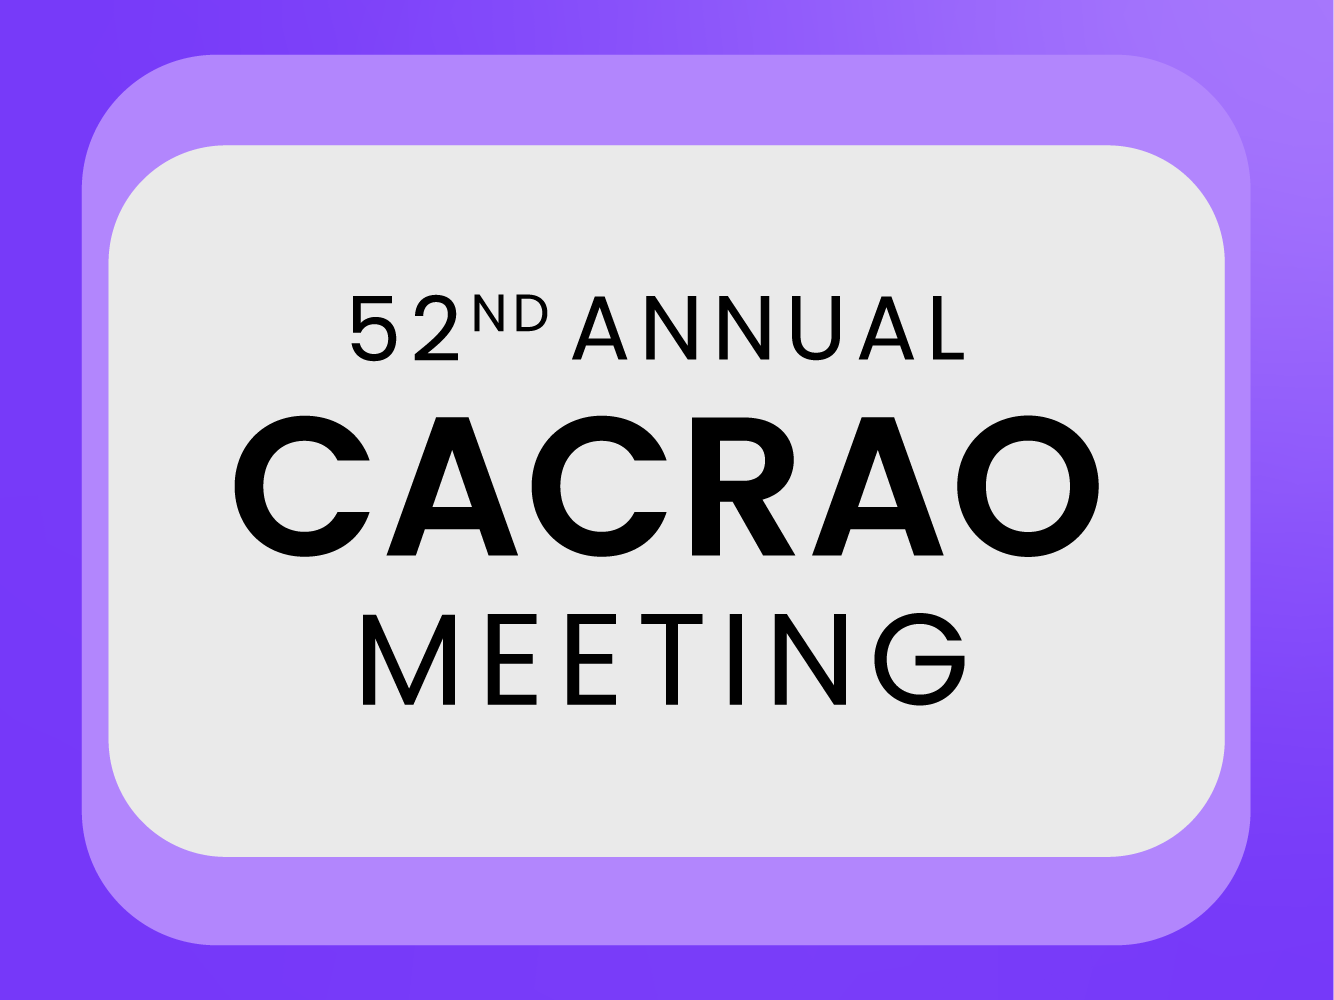 ProcessMaker is participating in the 52nd Annual CACRAO Meeting